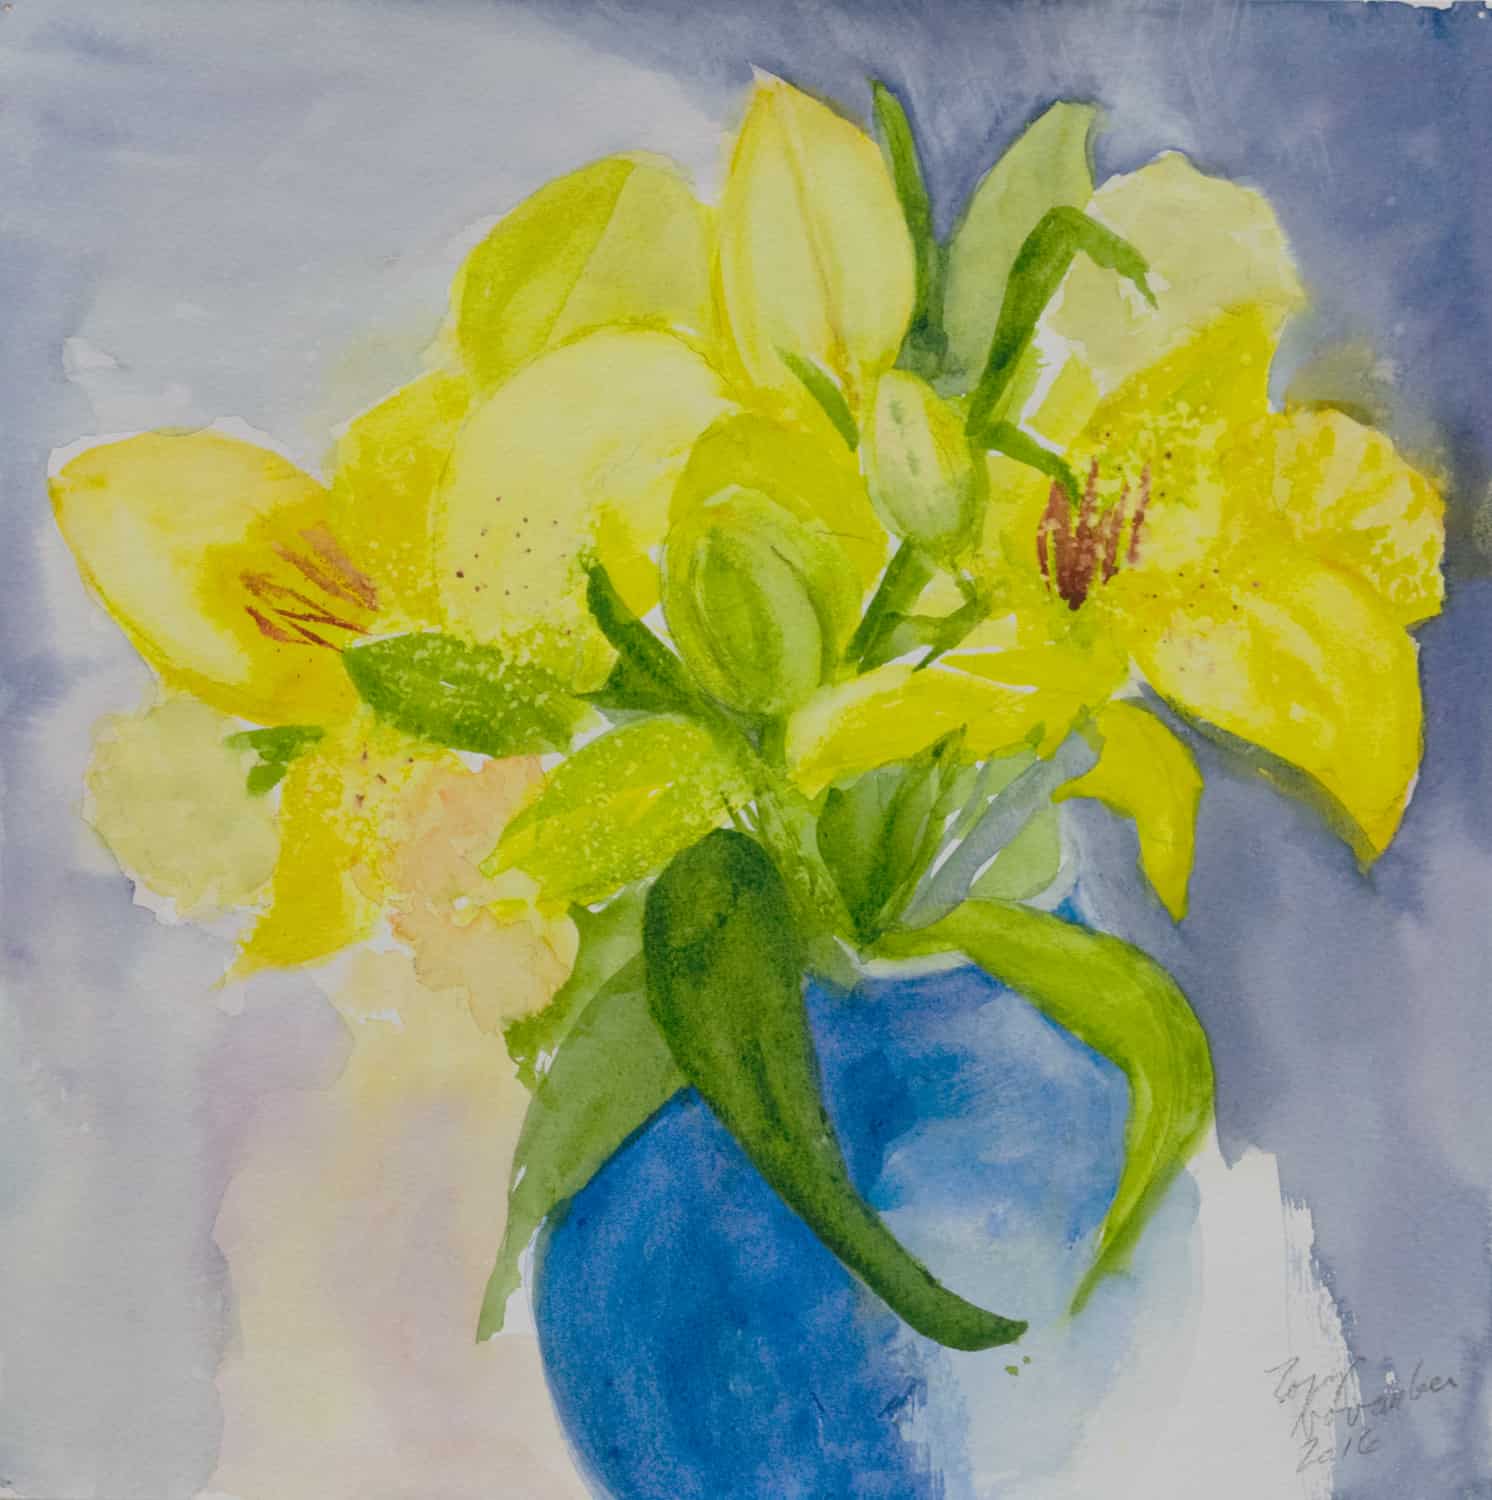 Lilies (2017), watercolor on hot press paper, 12 by 12 inches